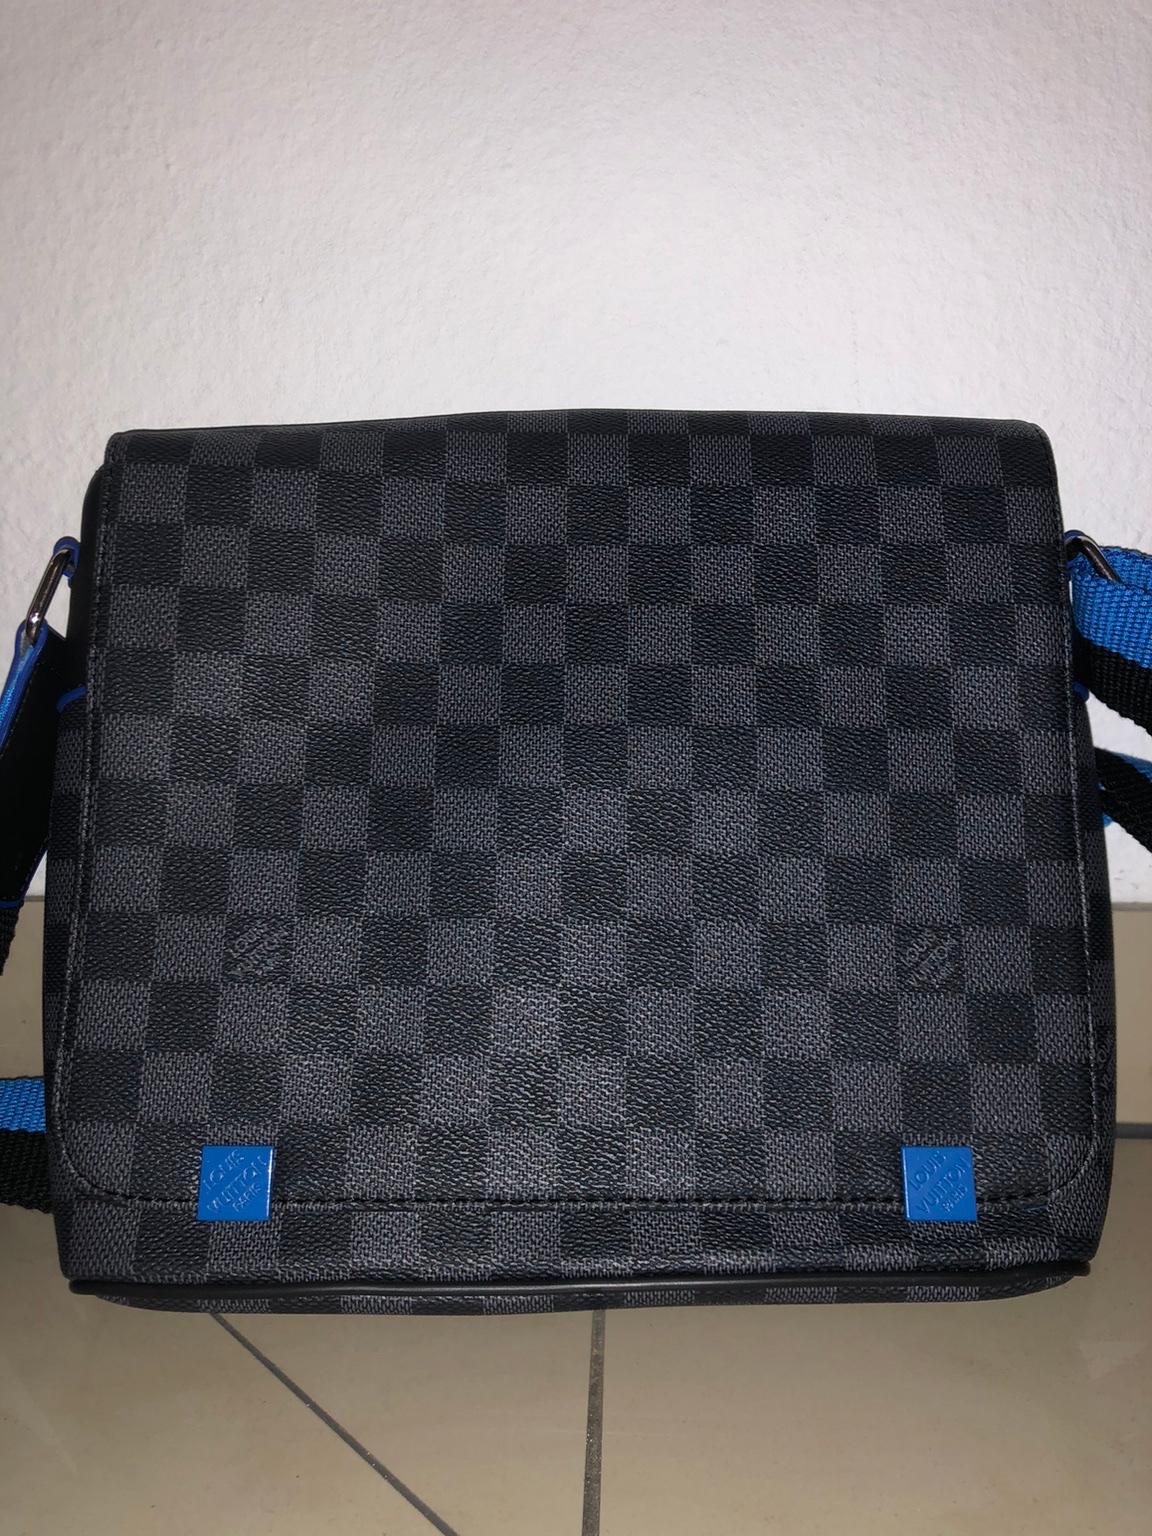 Louis Vuitton Bauchtasche in 63073 Offenbach am Main for €300.00 for sale